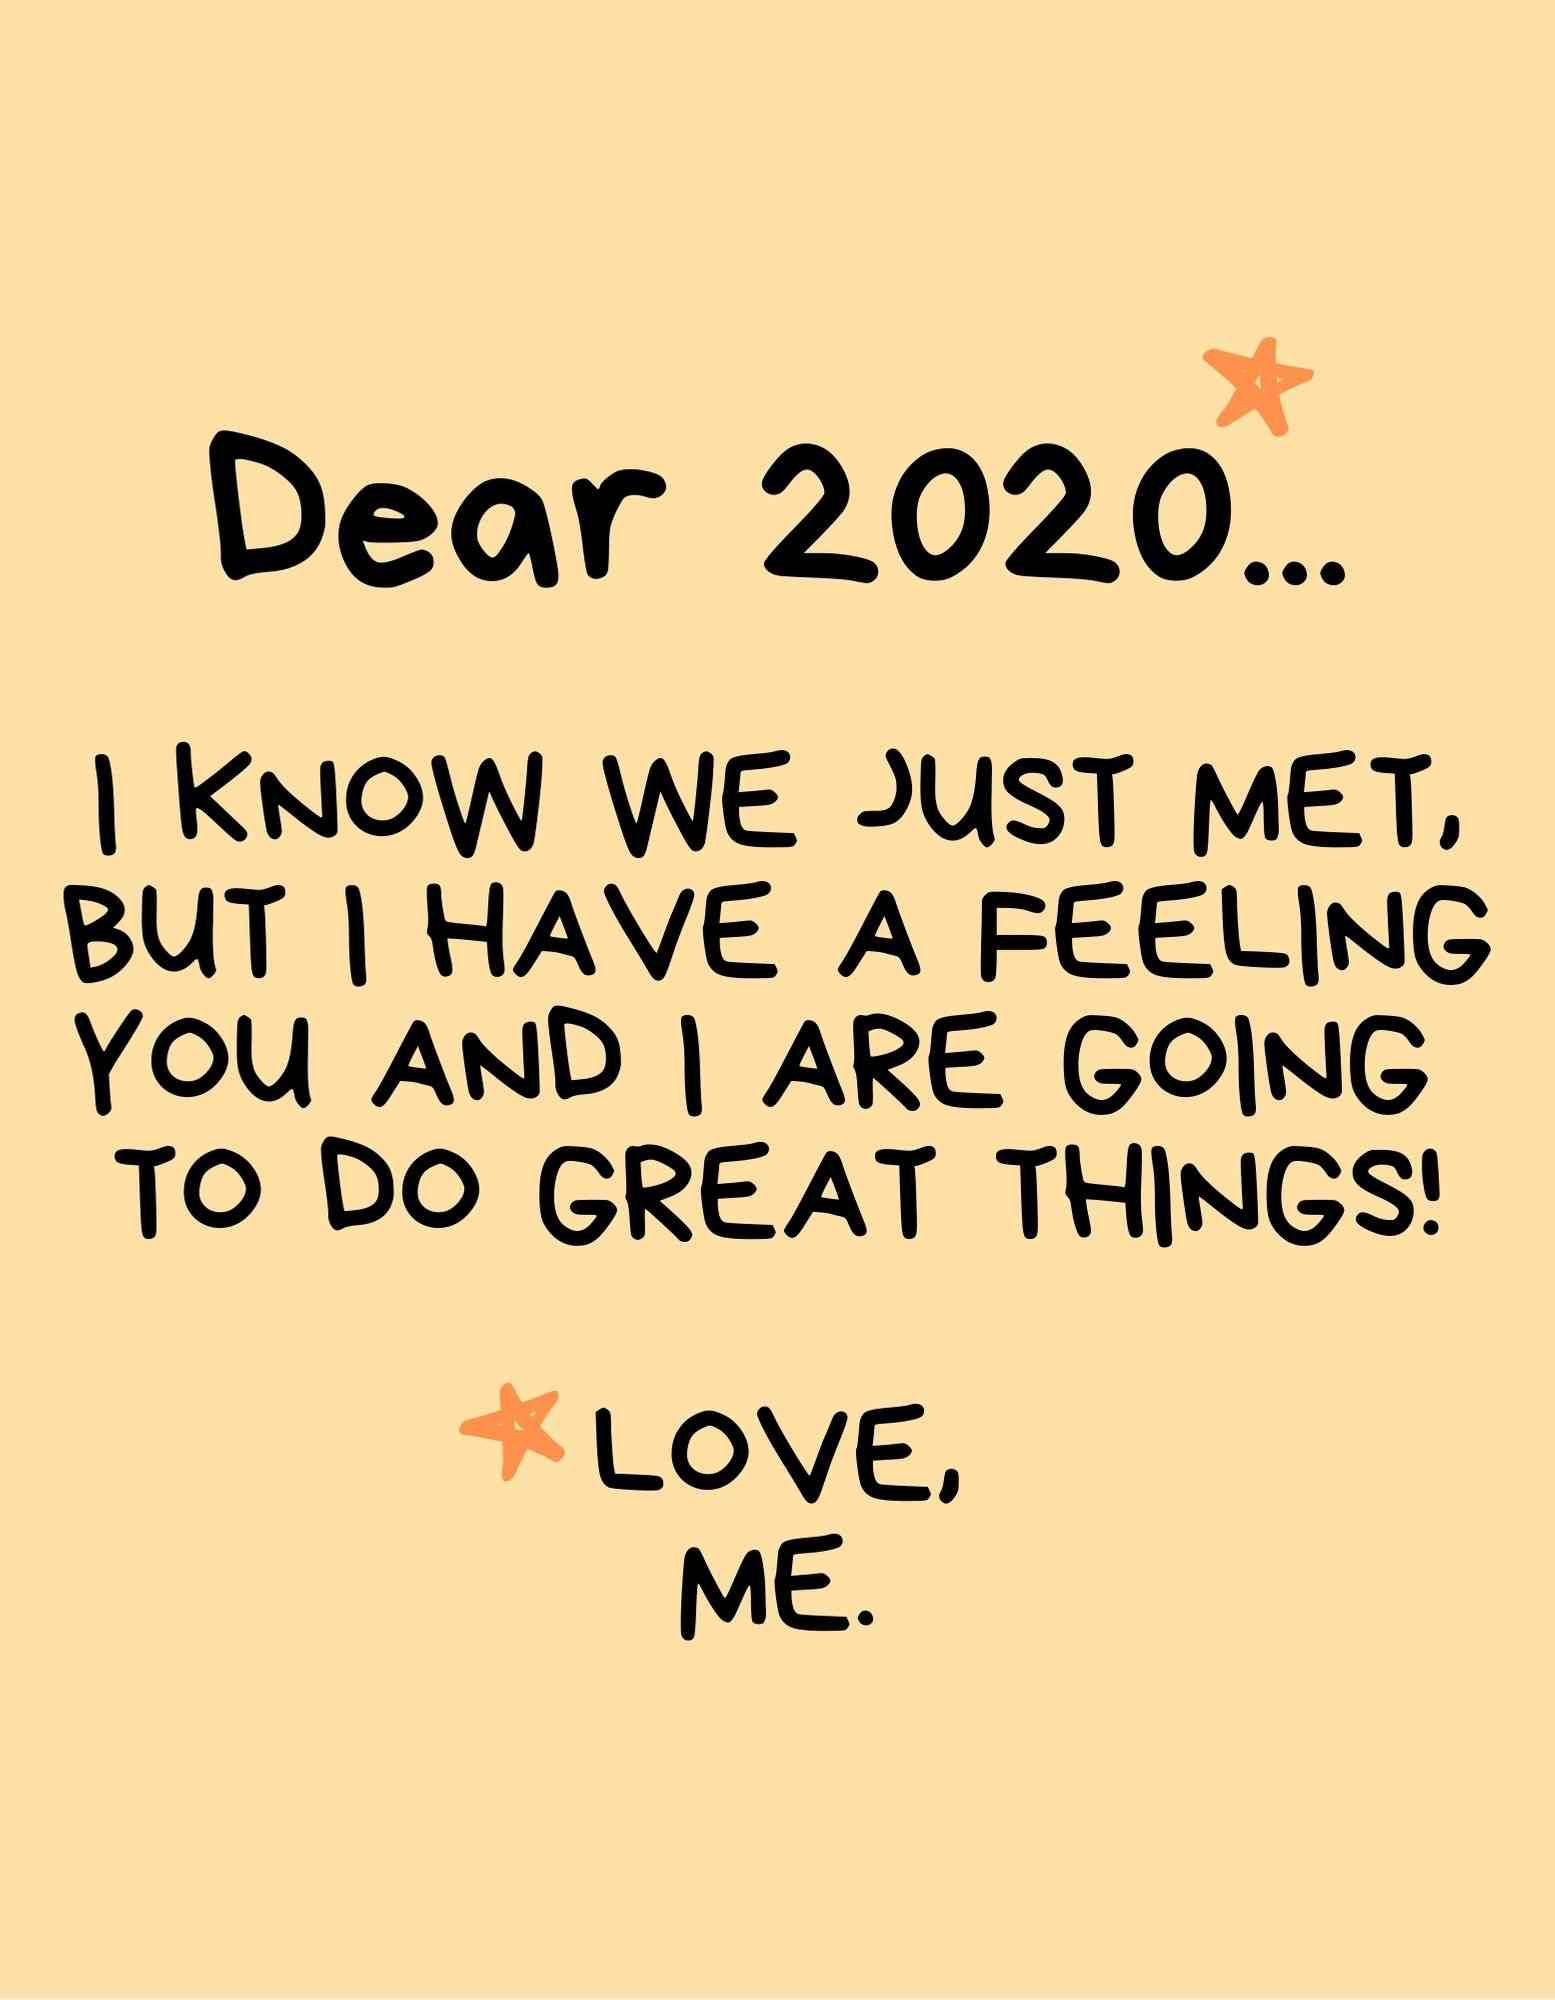 Quotes For New Year 2020
 Starting the new year right quotes 2020 Dear 2020 I know